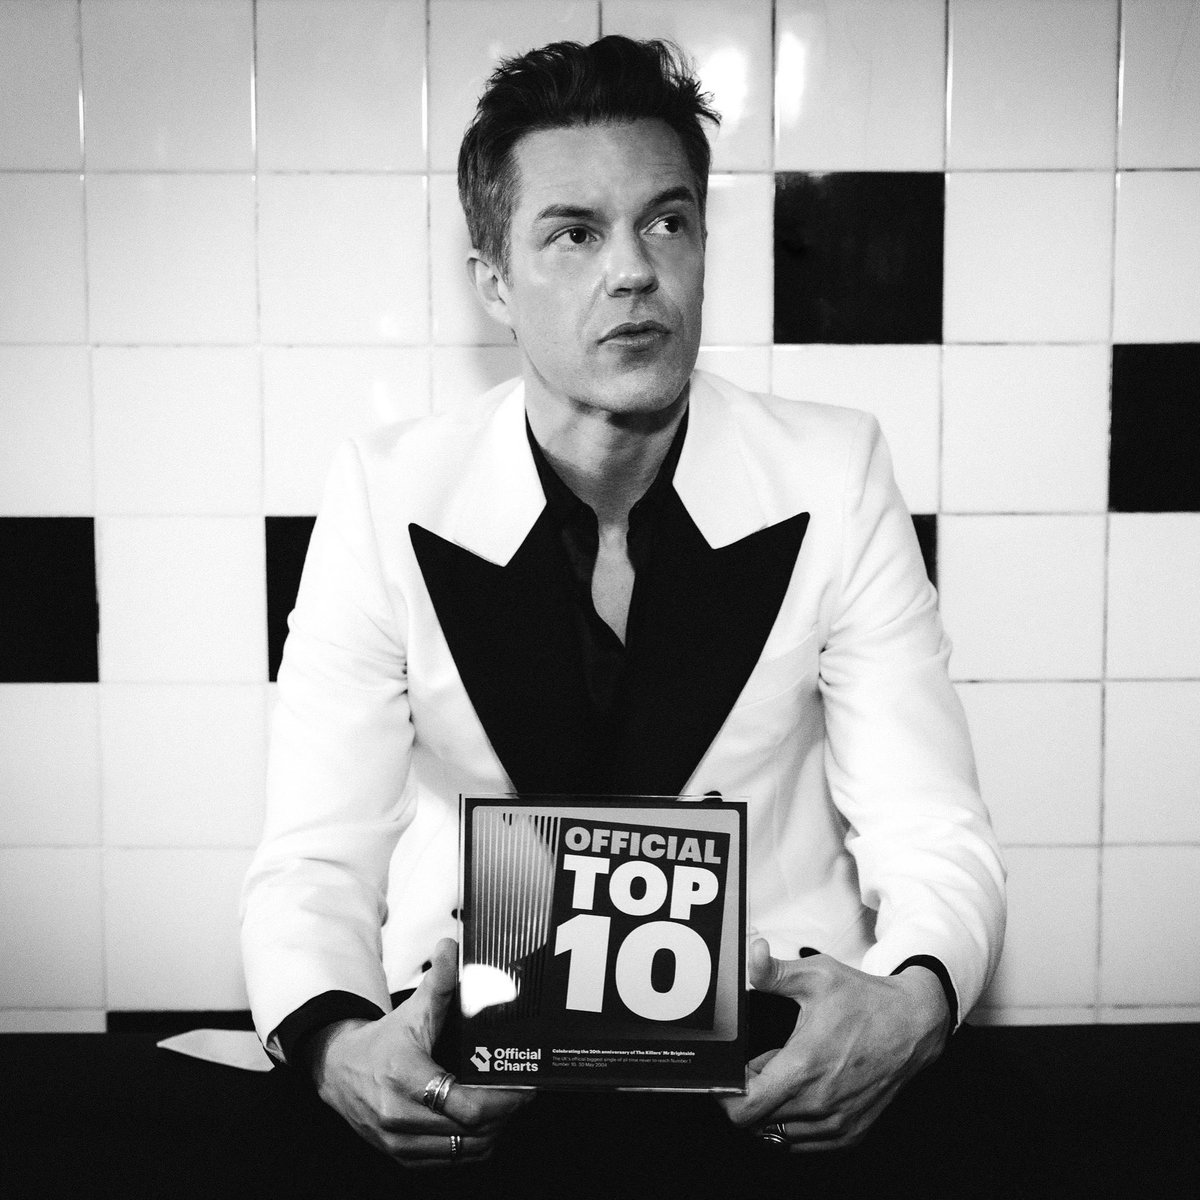 20 years after its first chart appearance, @thekillers’ Mr Brightside has officially been crowned the UK’s biggest single of all time yet to reach Number 1! To celebrate, @officialcharts presented @BrandonFlowers with an Official Top 10 Award 🔟🏆